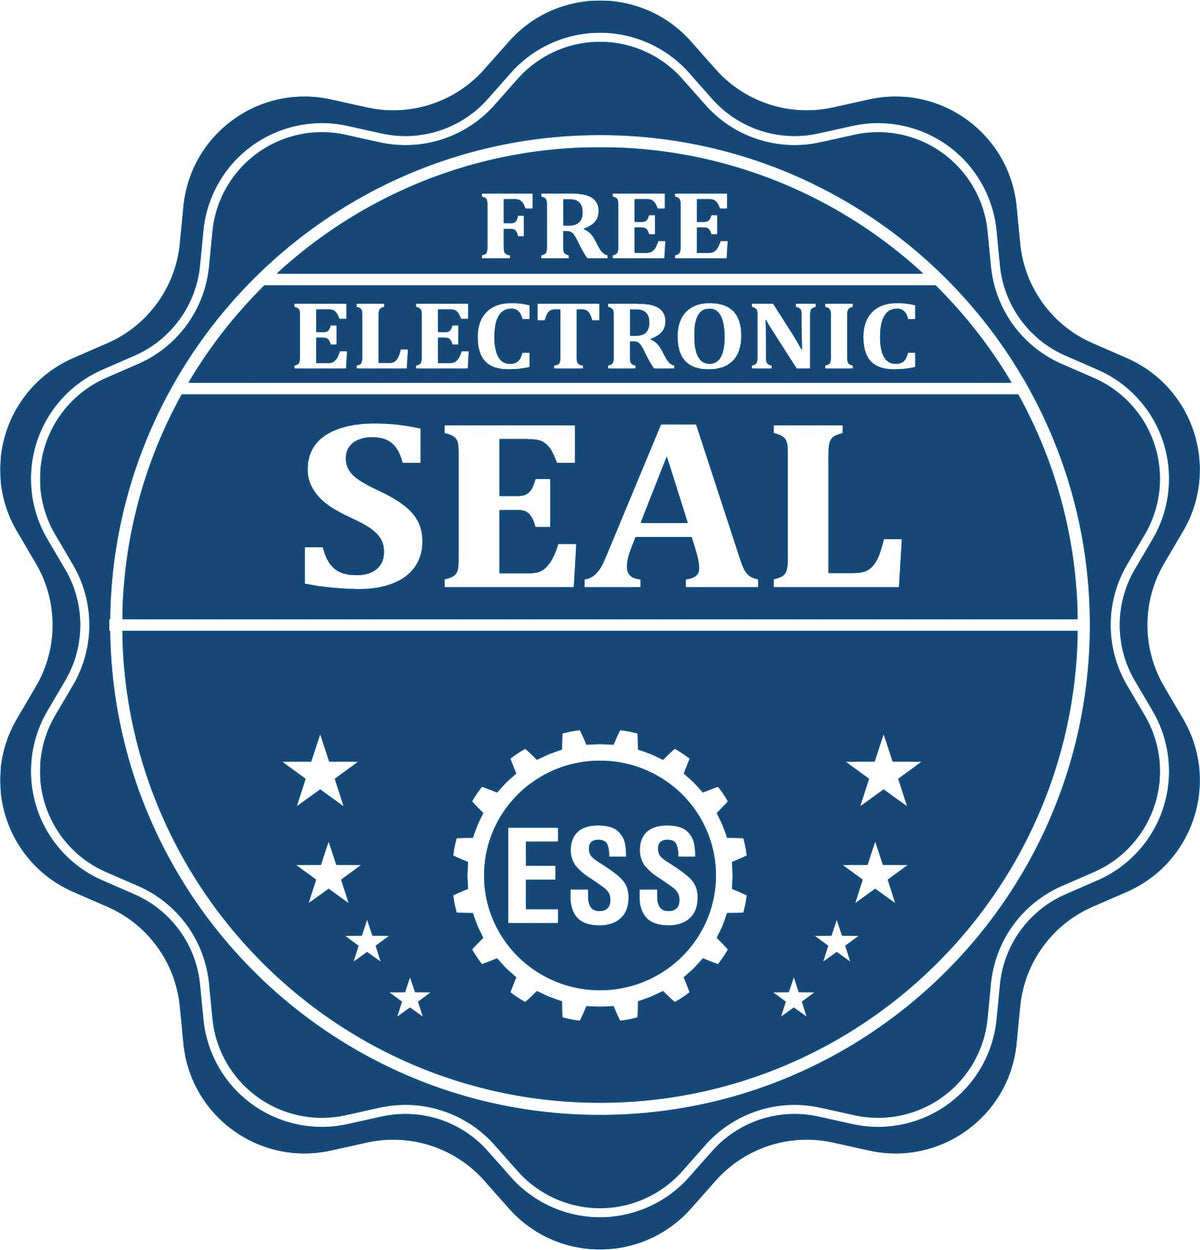 A badge showing a free electronic seal for the Maryland Geologist Desk Seal with stars and the ESS gear on the emblem.